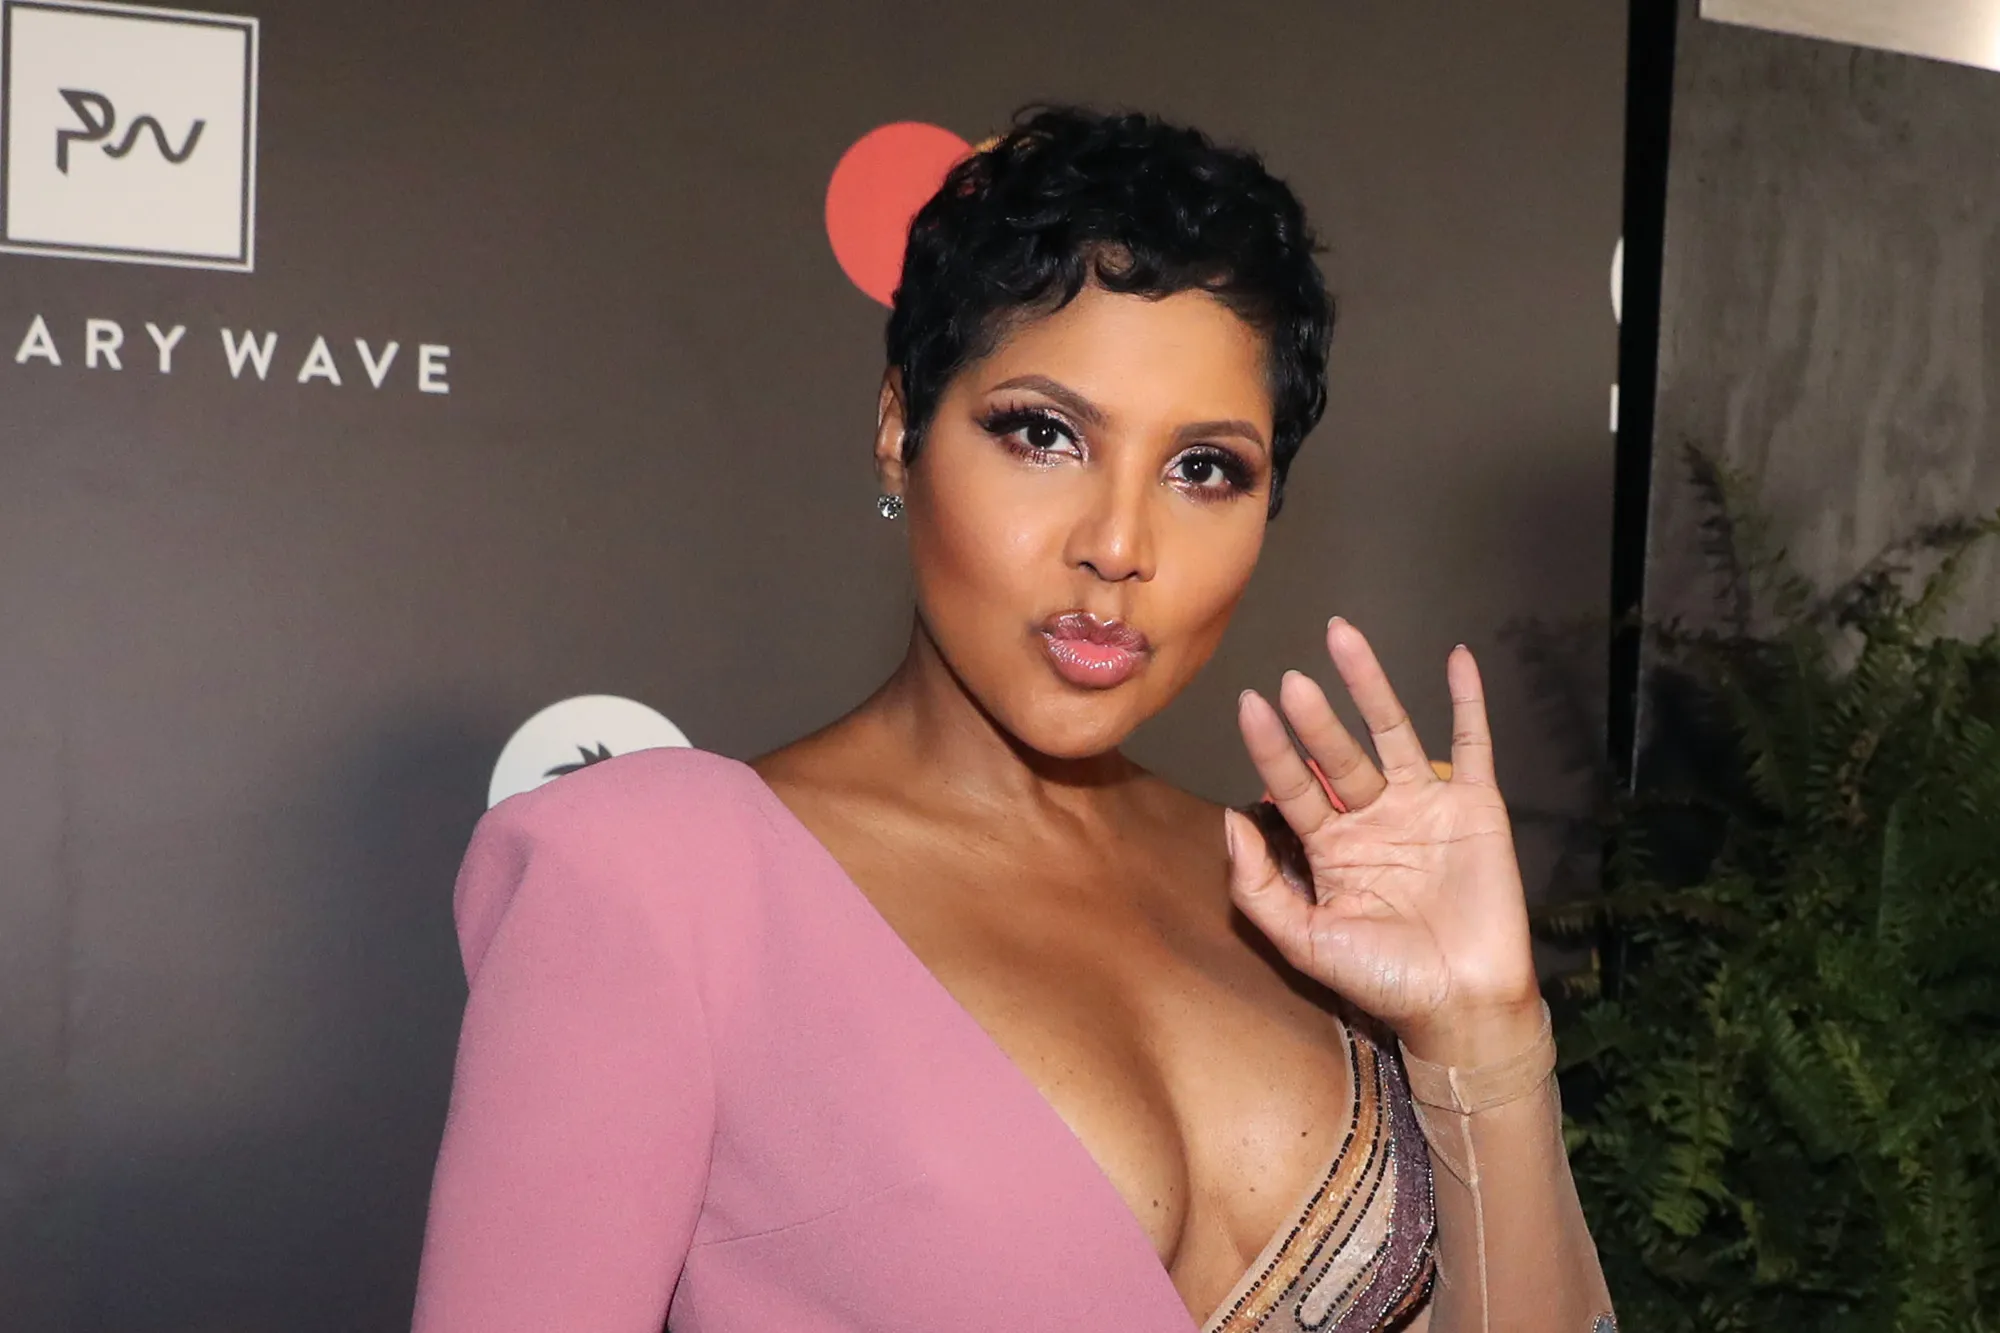 Who is Toni Braxton Dating Now? Did She Break Up with Birdman?